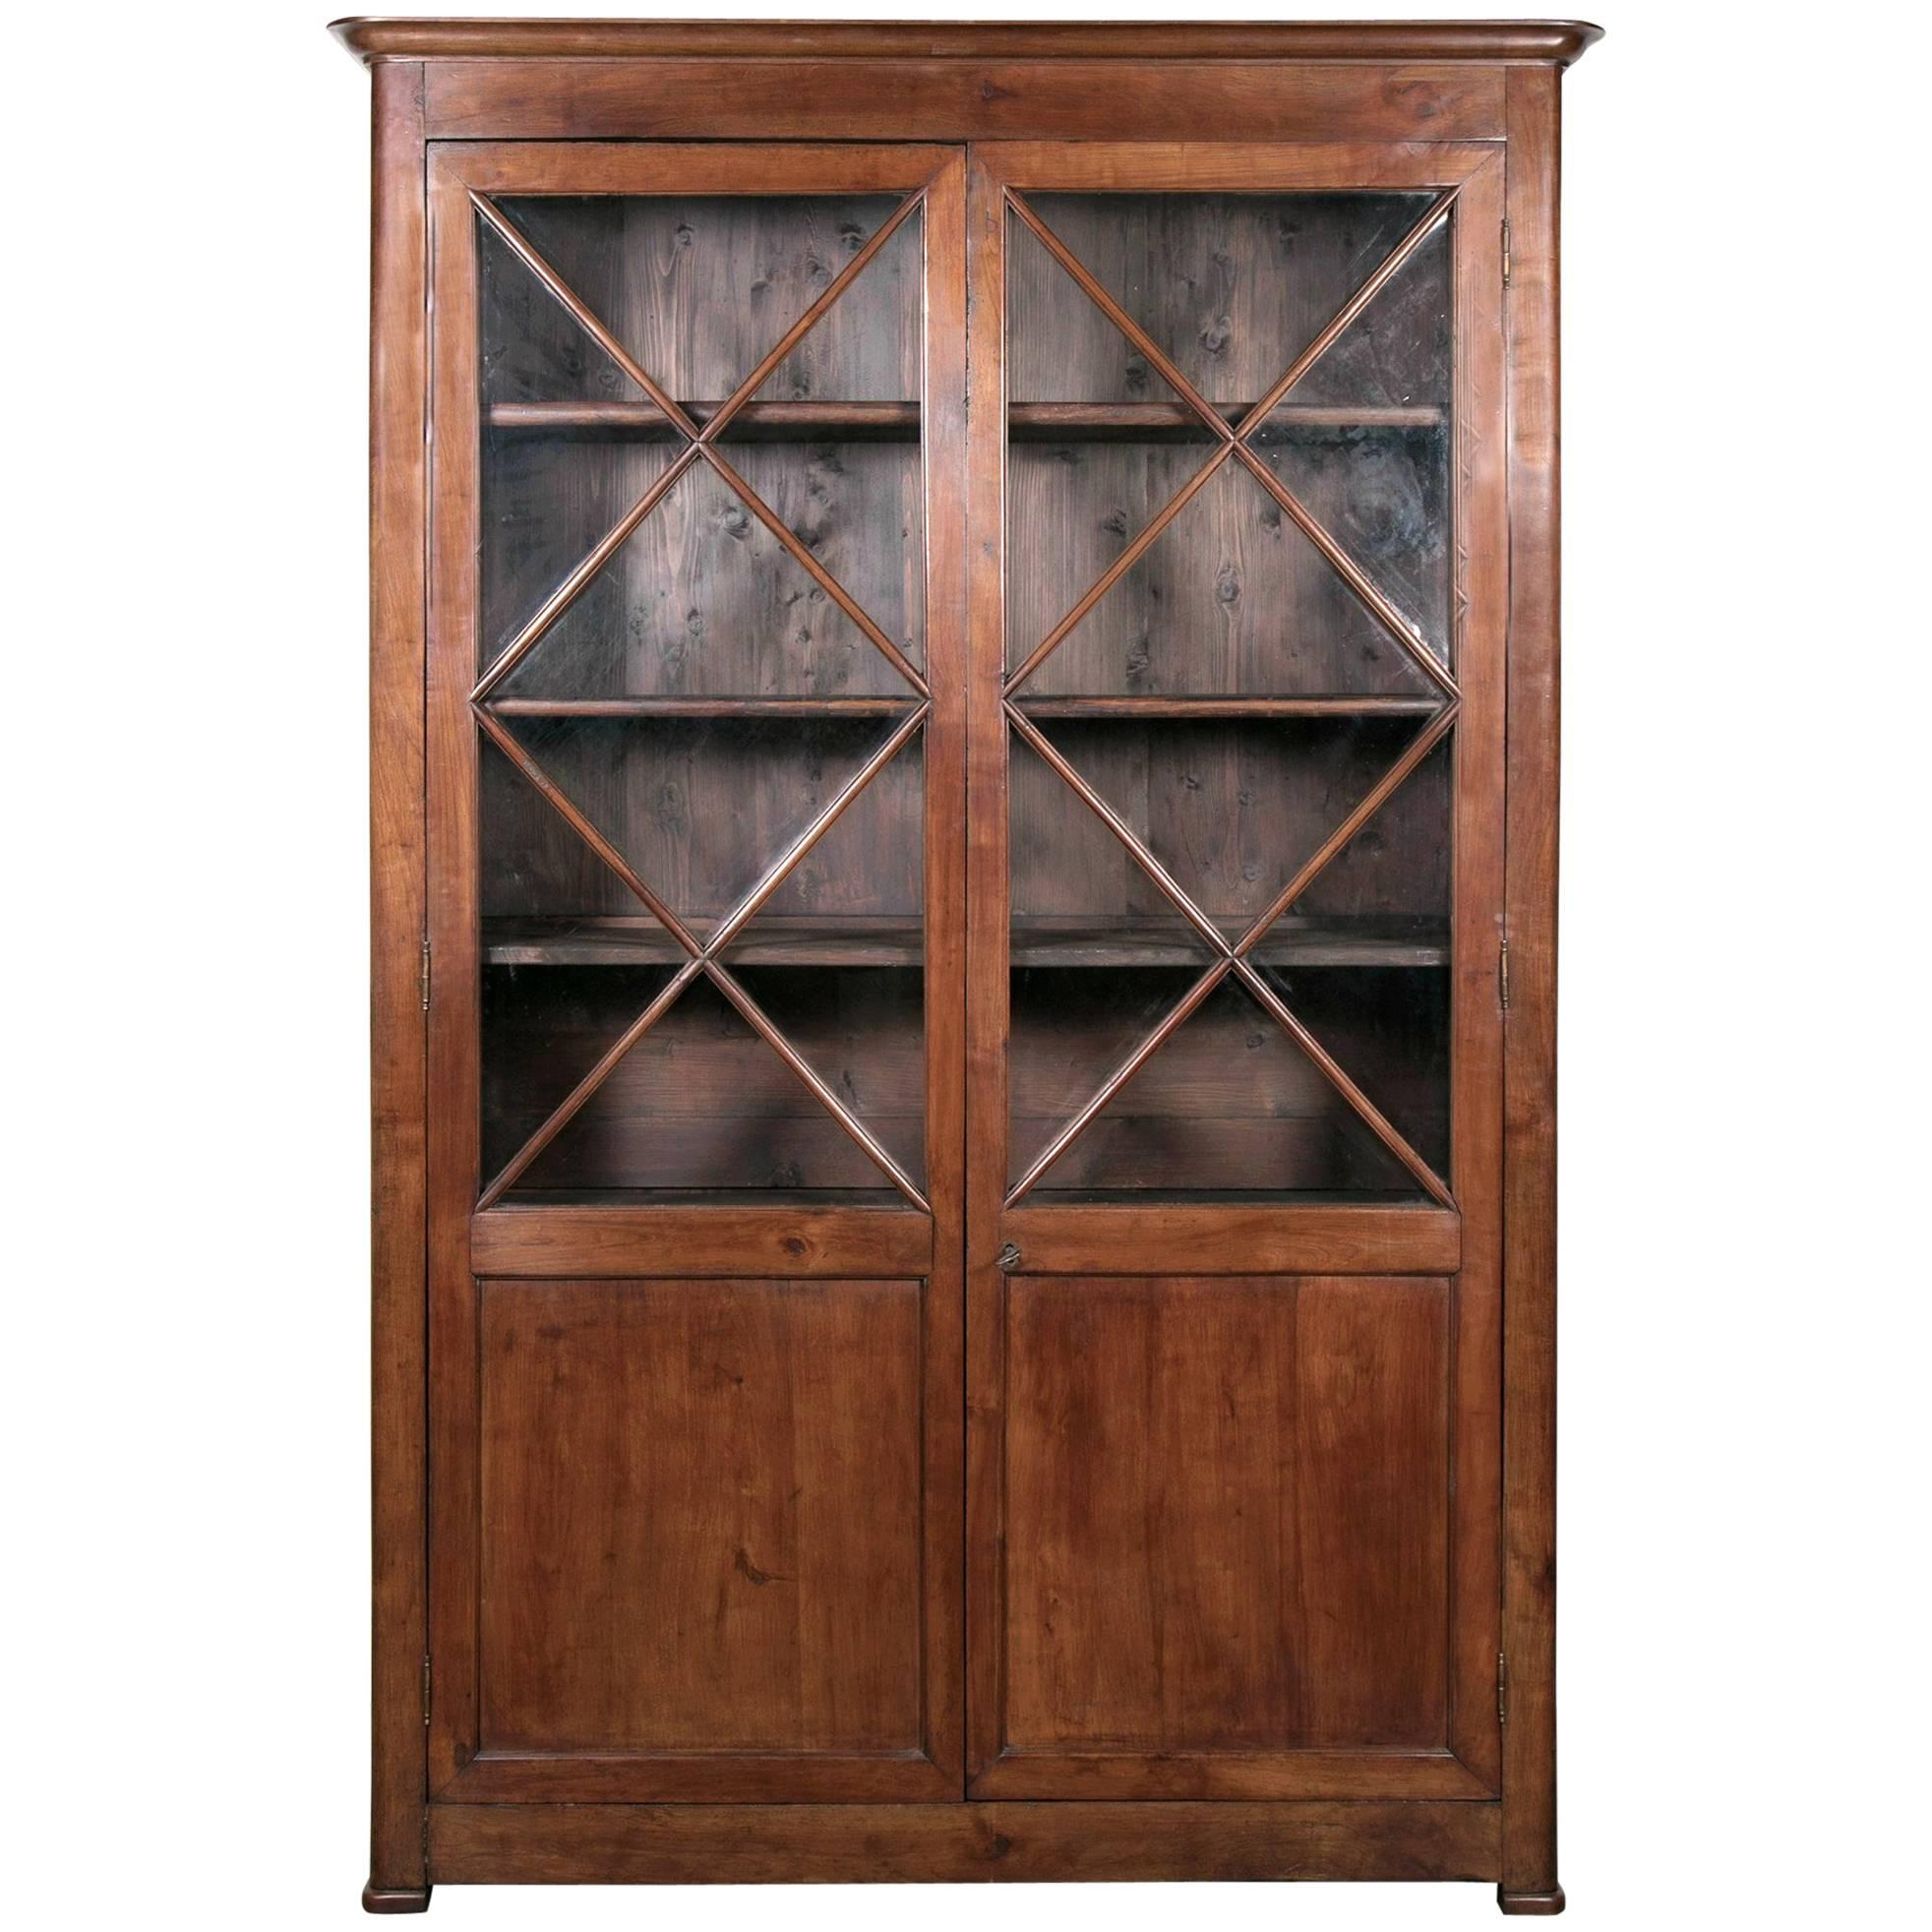 19th Century French Louis Philippe Period Cherrywood Bibliotheque or Bookcase